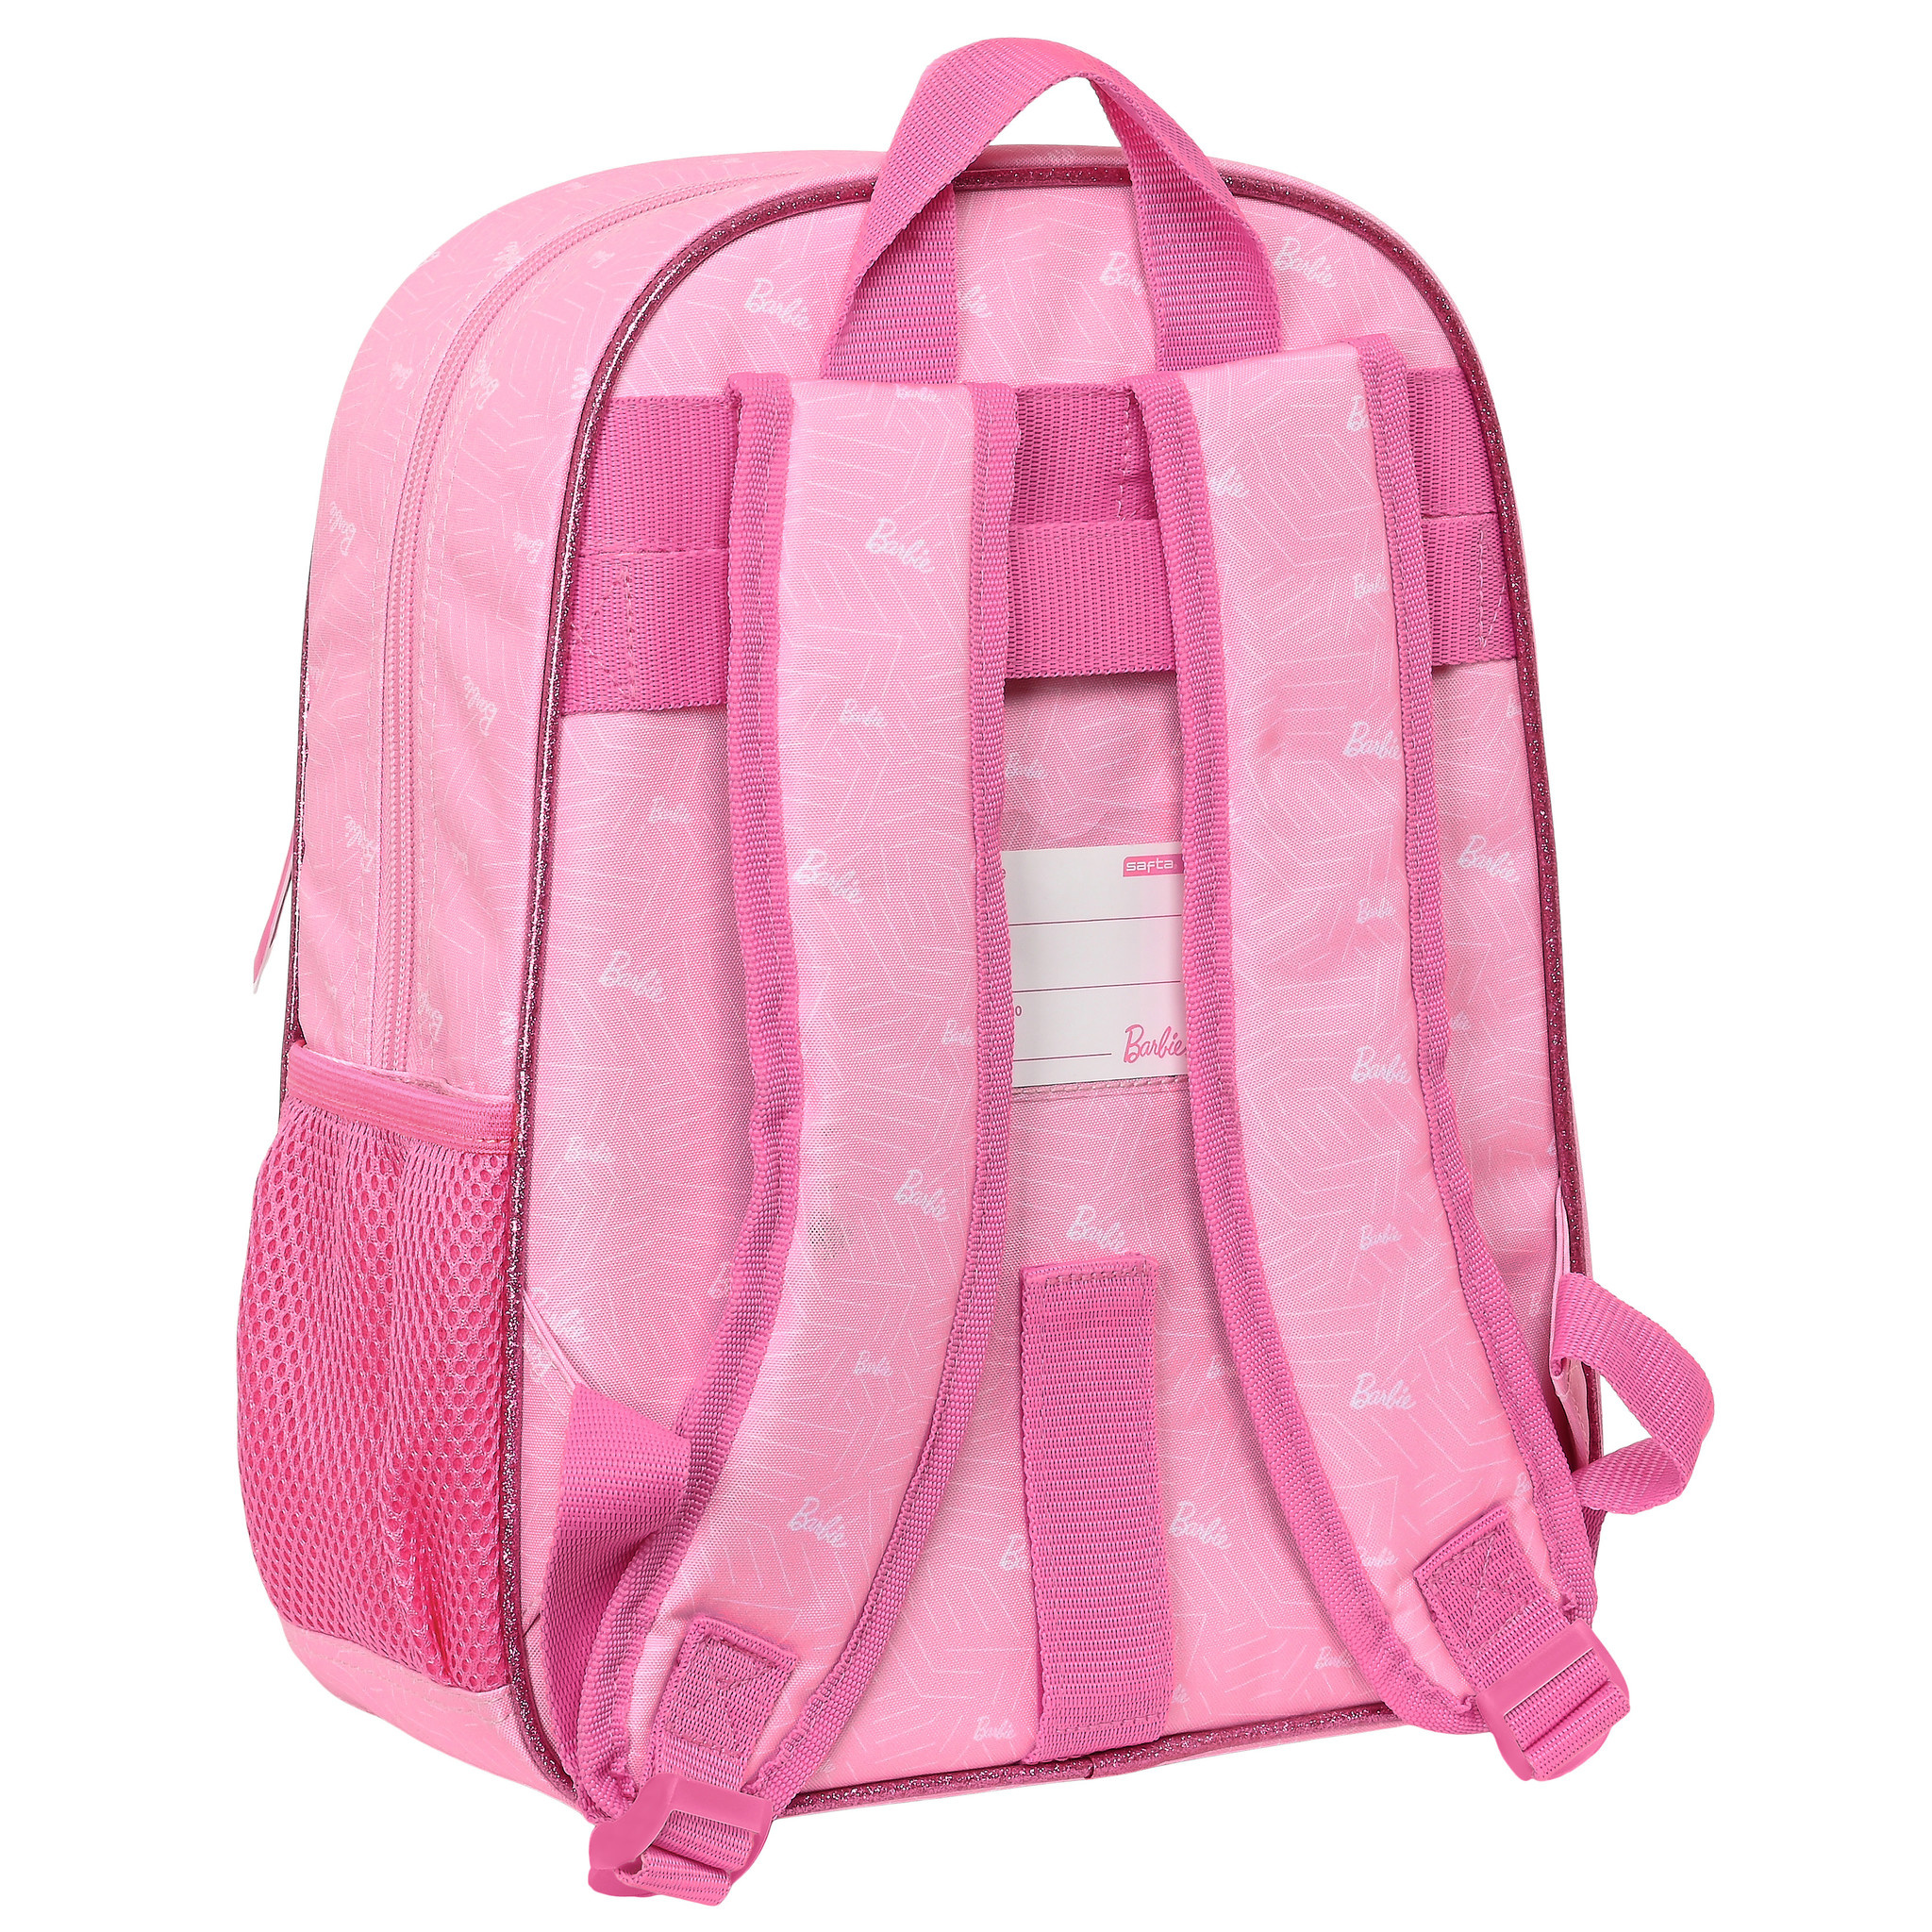 Barbie Backpack, Girl- 34 x 28 x 10 cm - Polyester